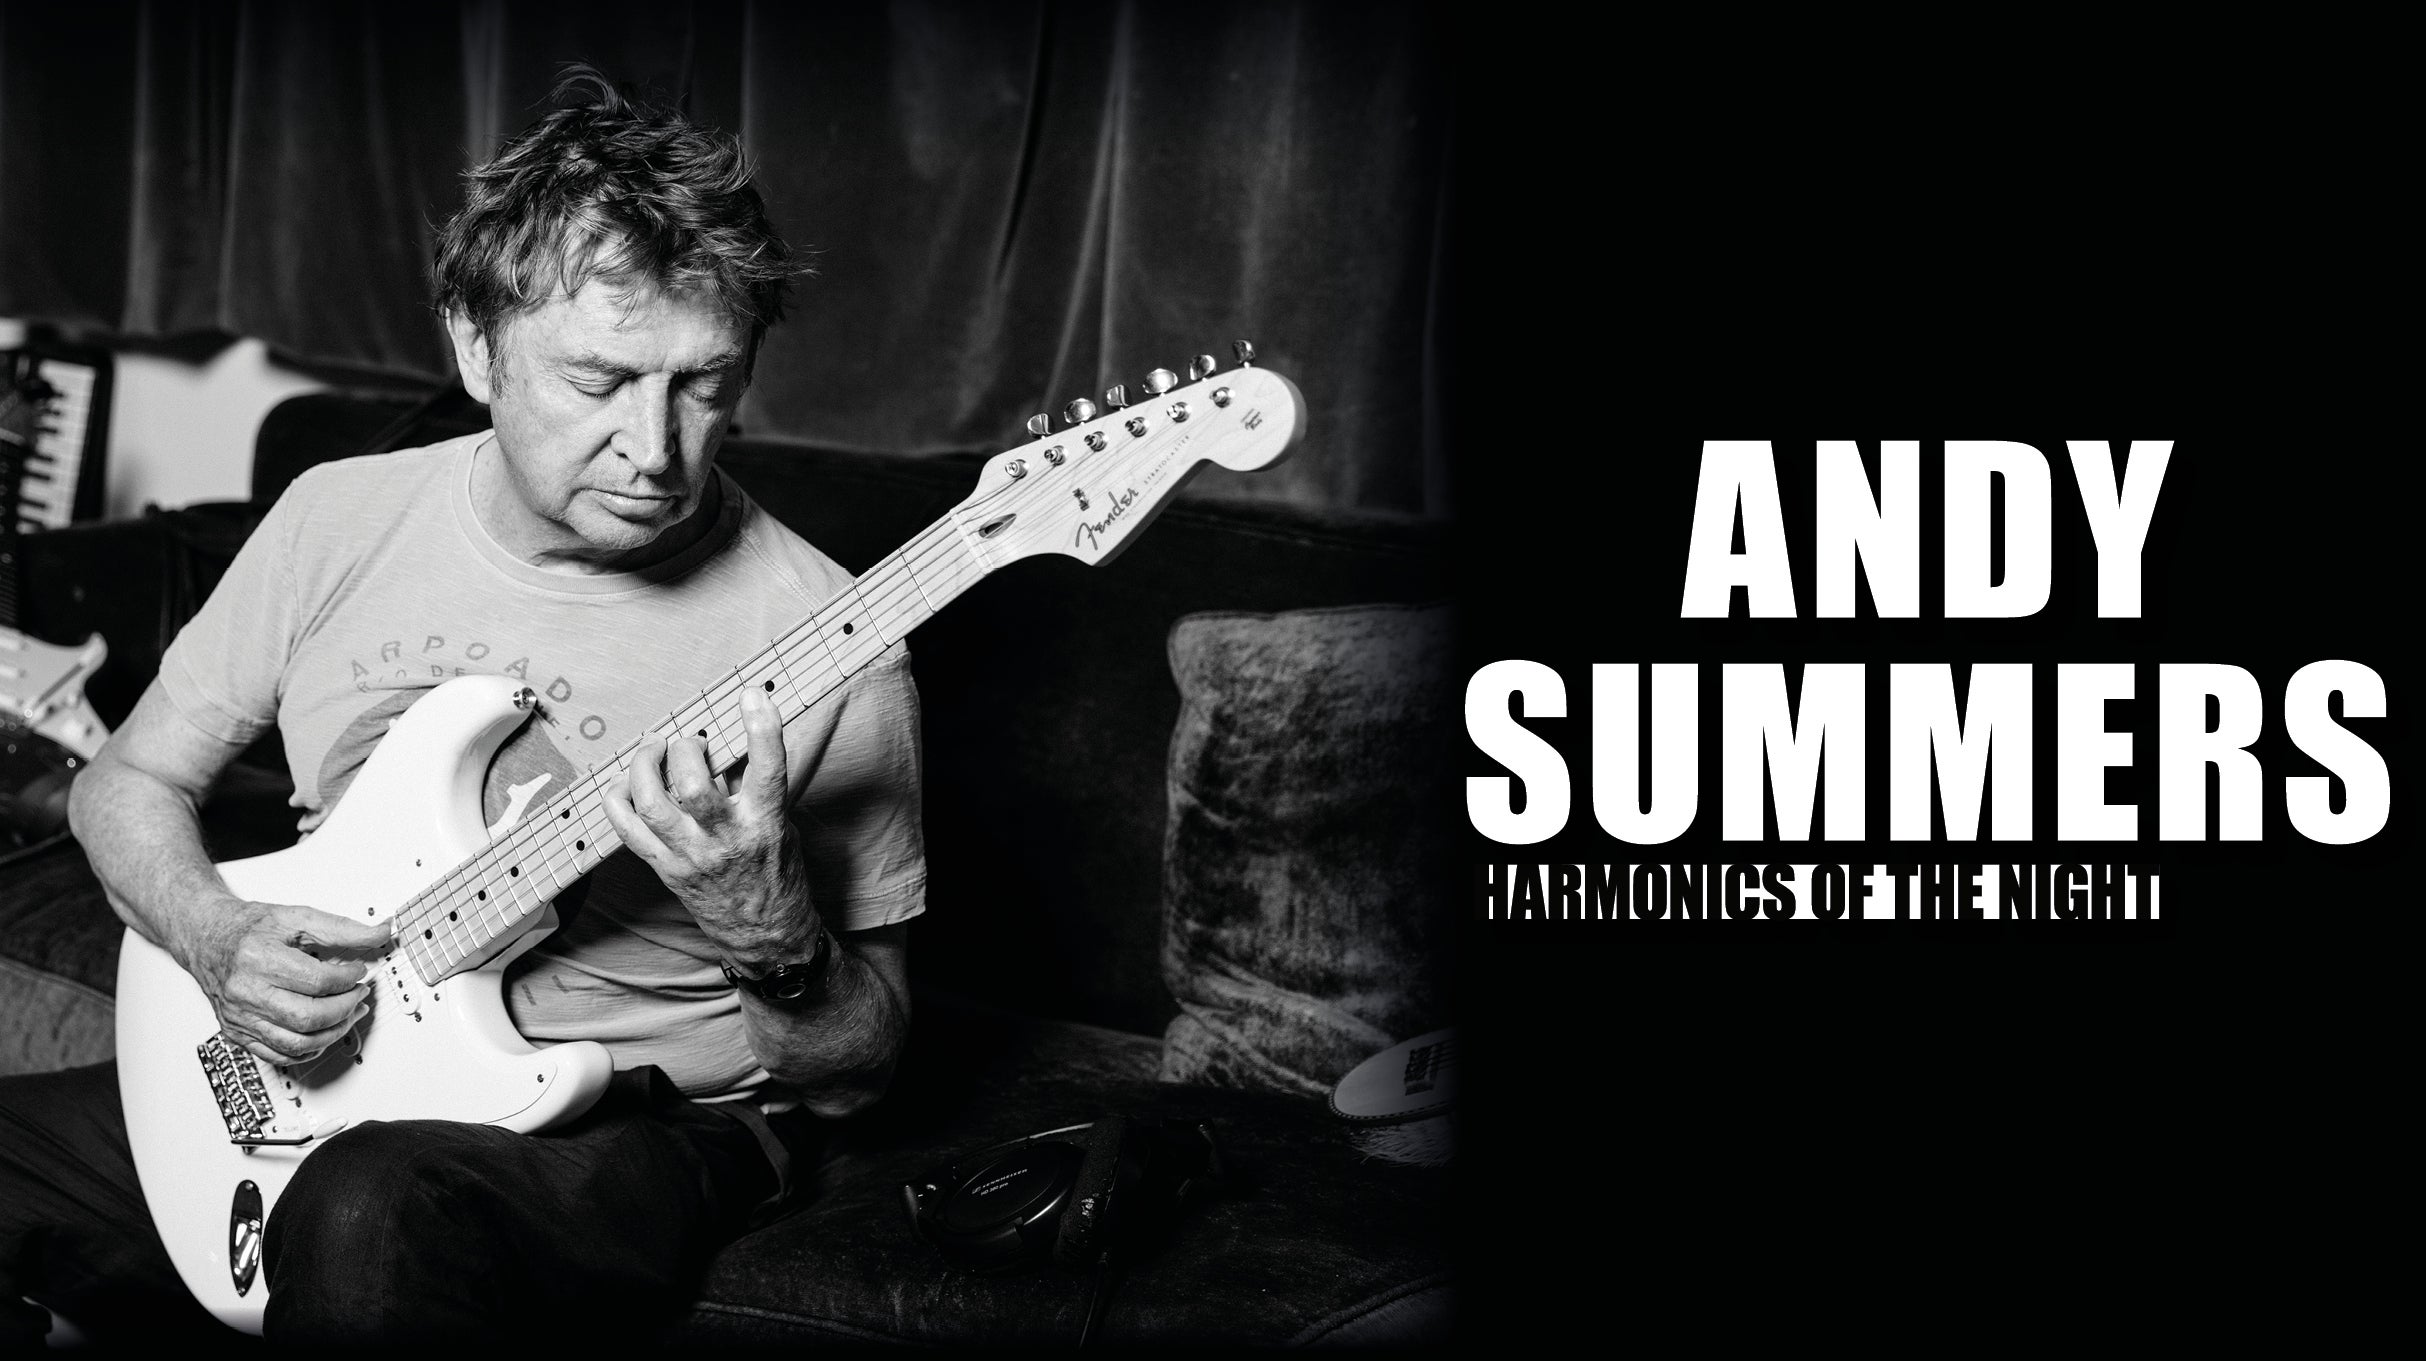 Andy Summers (from the Police) at Jefferson Theater